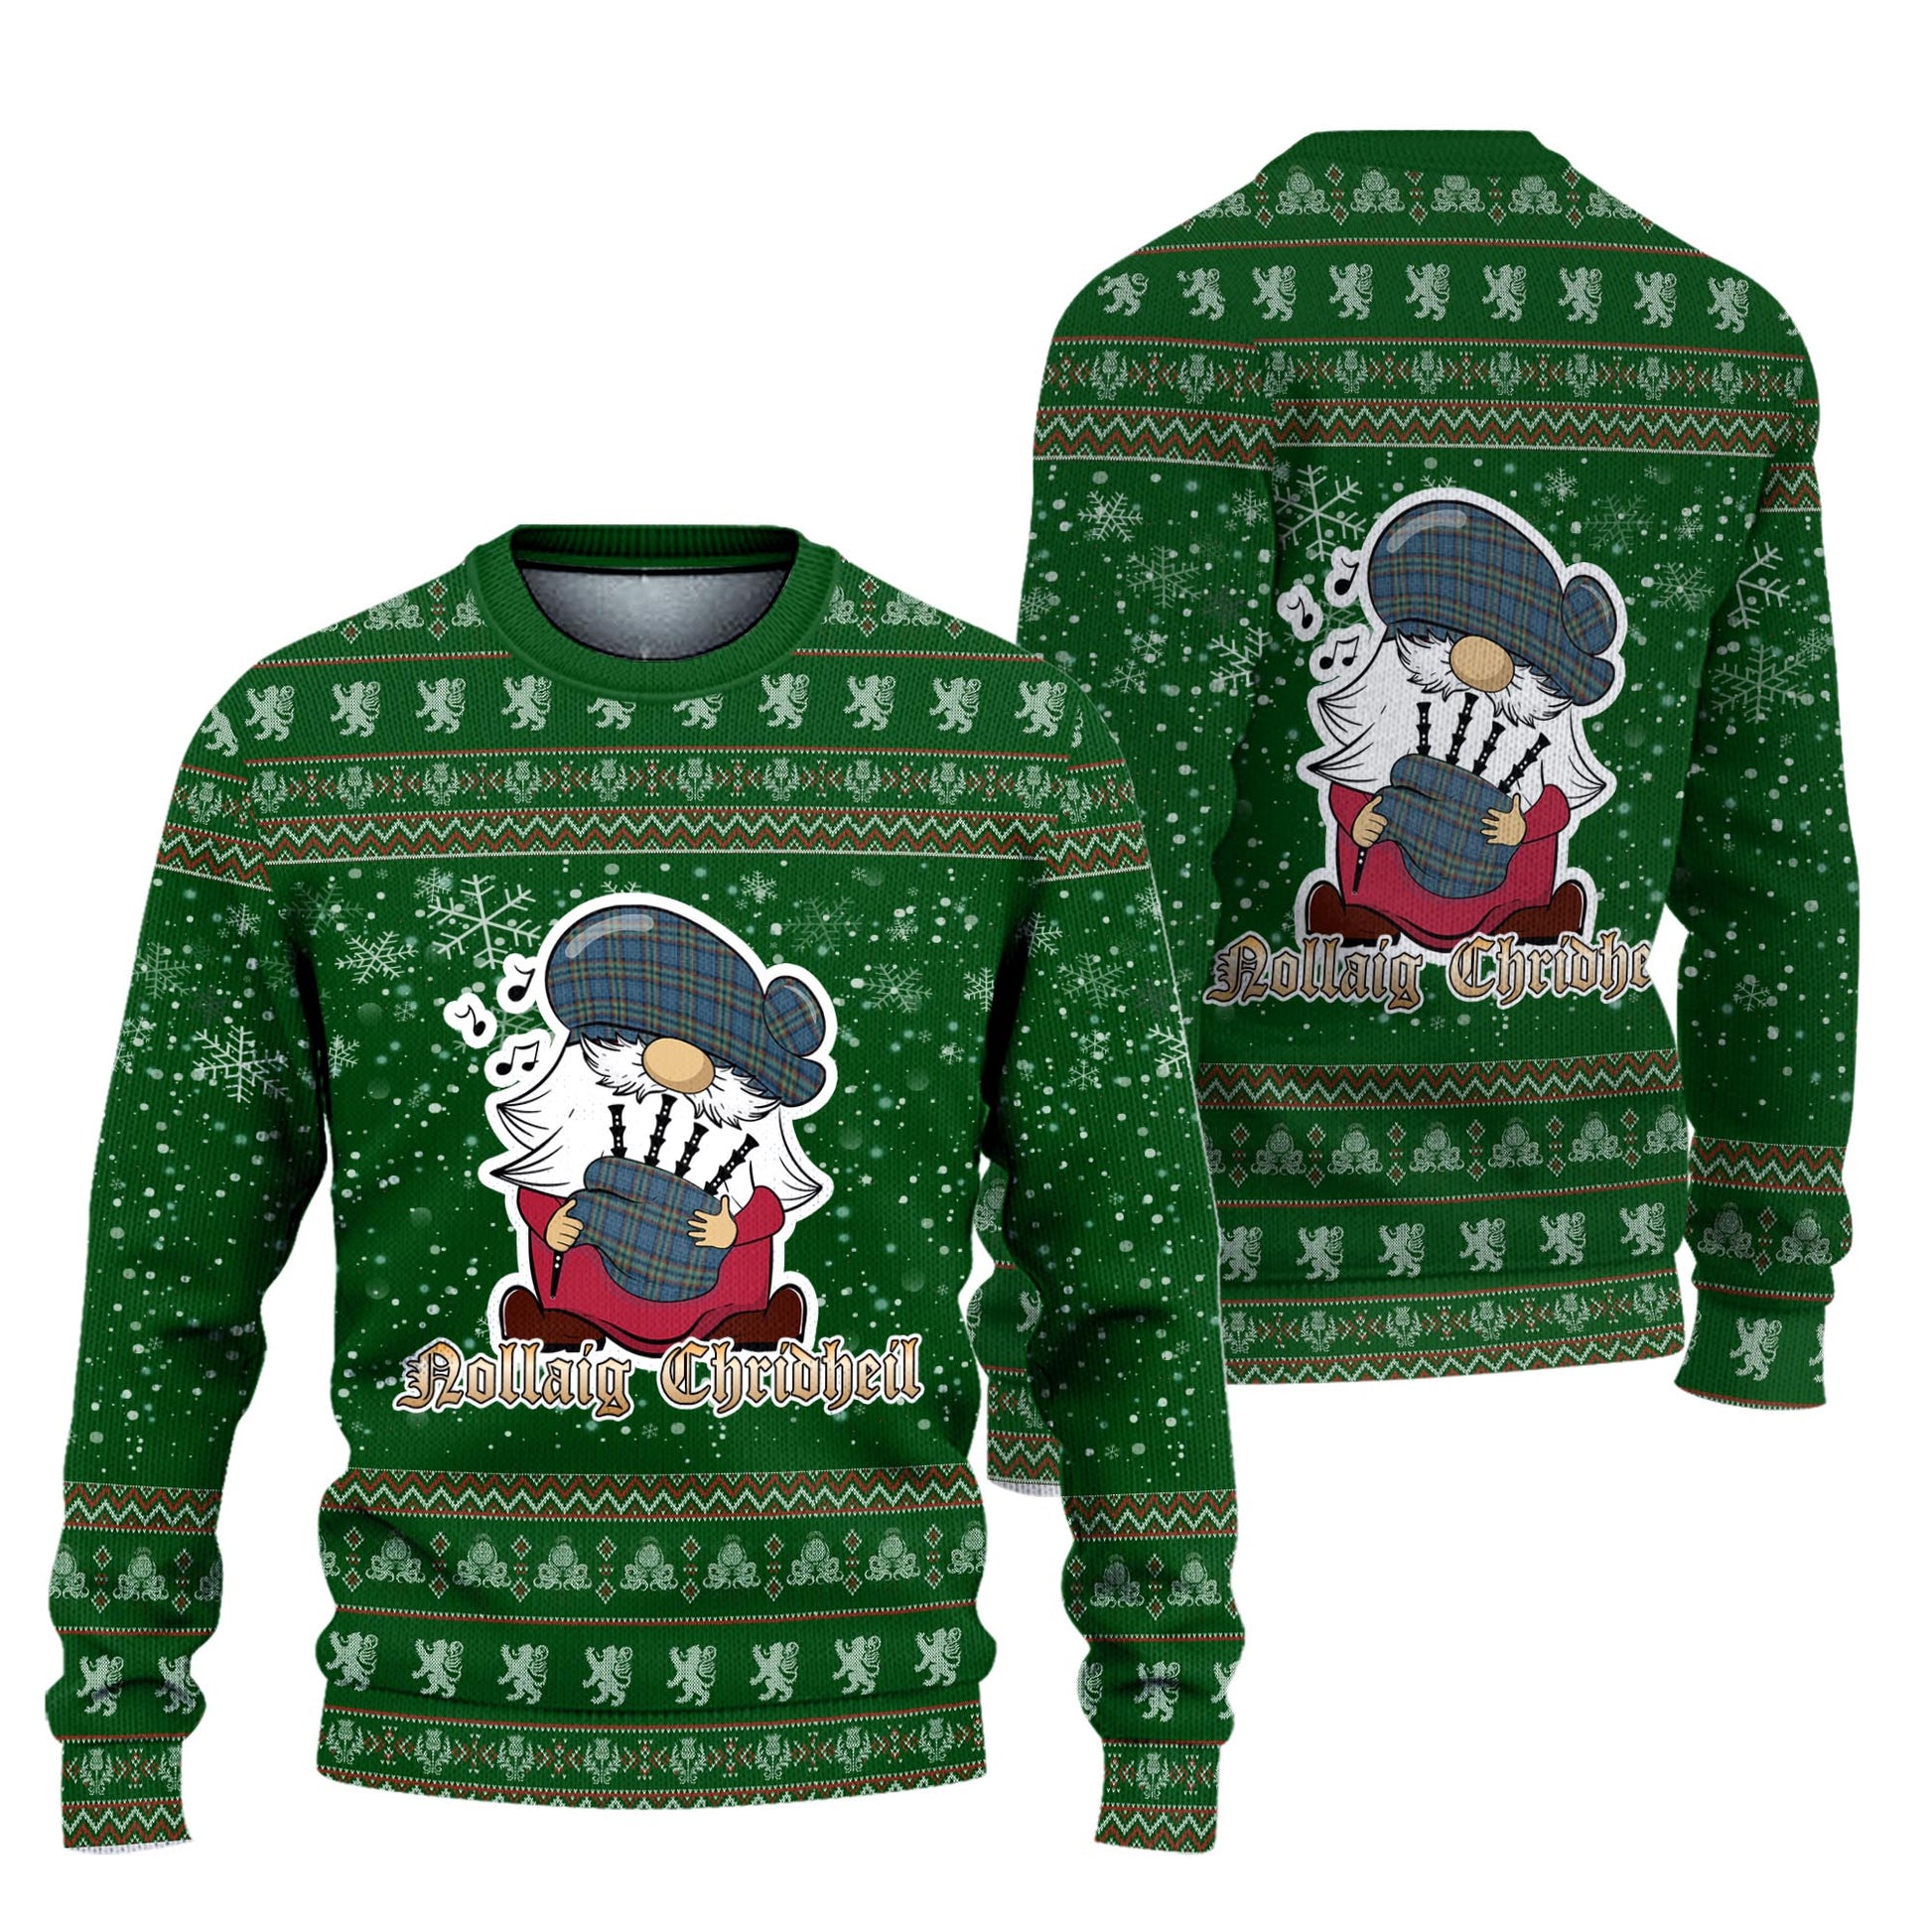 Ralston UK Clan Christmas Family Knitted Sweater with Funny Gnome Playing Bagpipes Unisex Green - Tartanvibesclothing